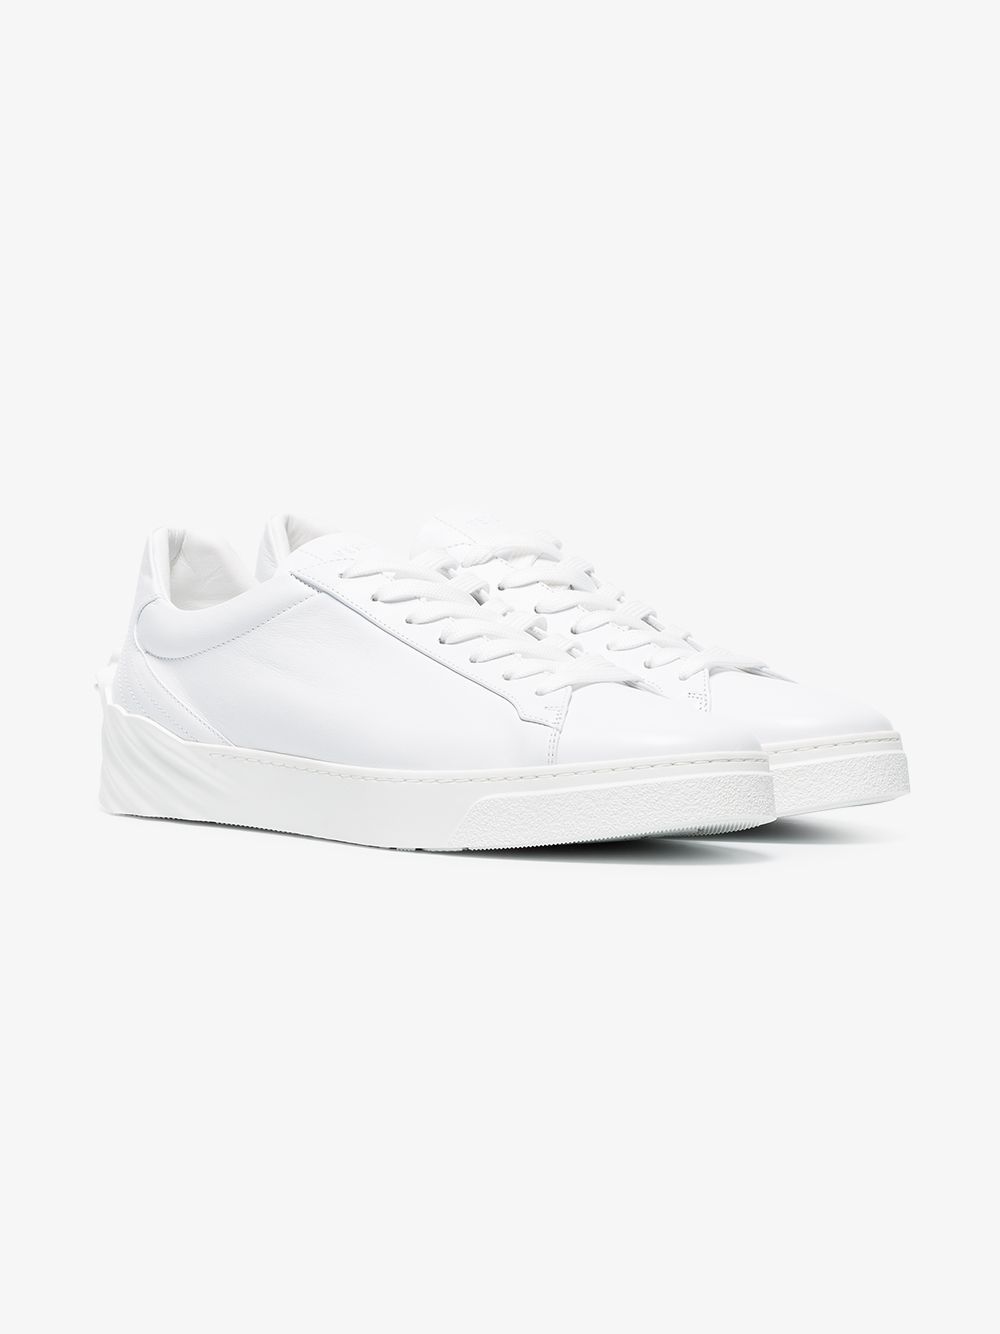 Versace Medusa leather sneakers | Browns Fashion